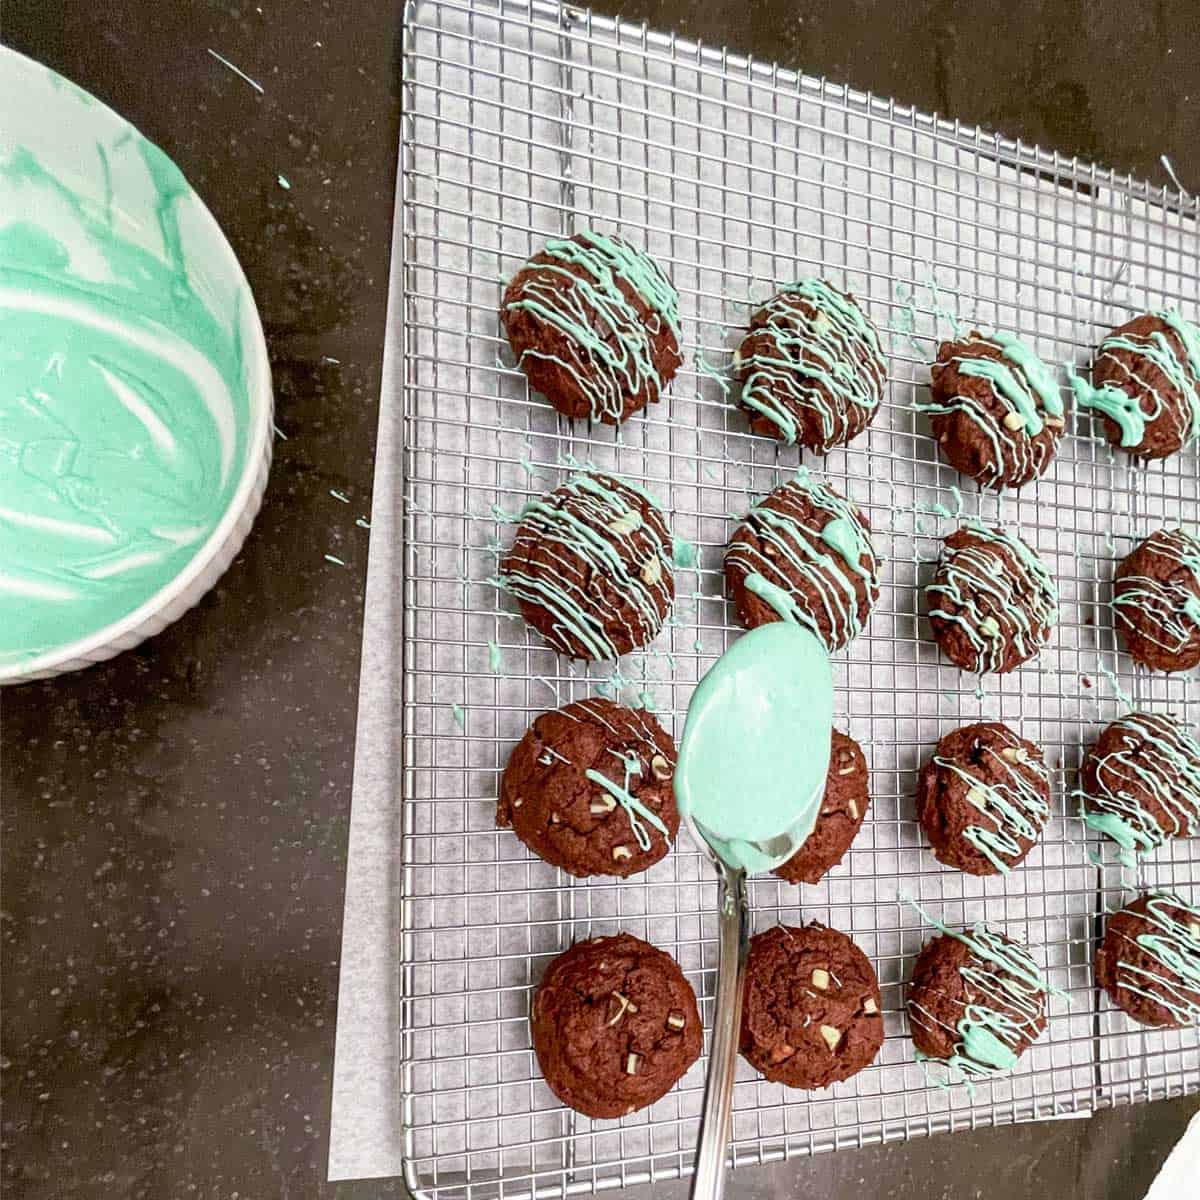 Green colored white chocolate in a spoon going back and forth to drizzle over the tops of the baked cookies.